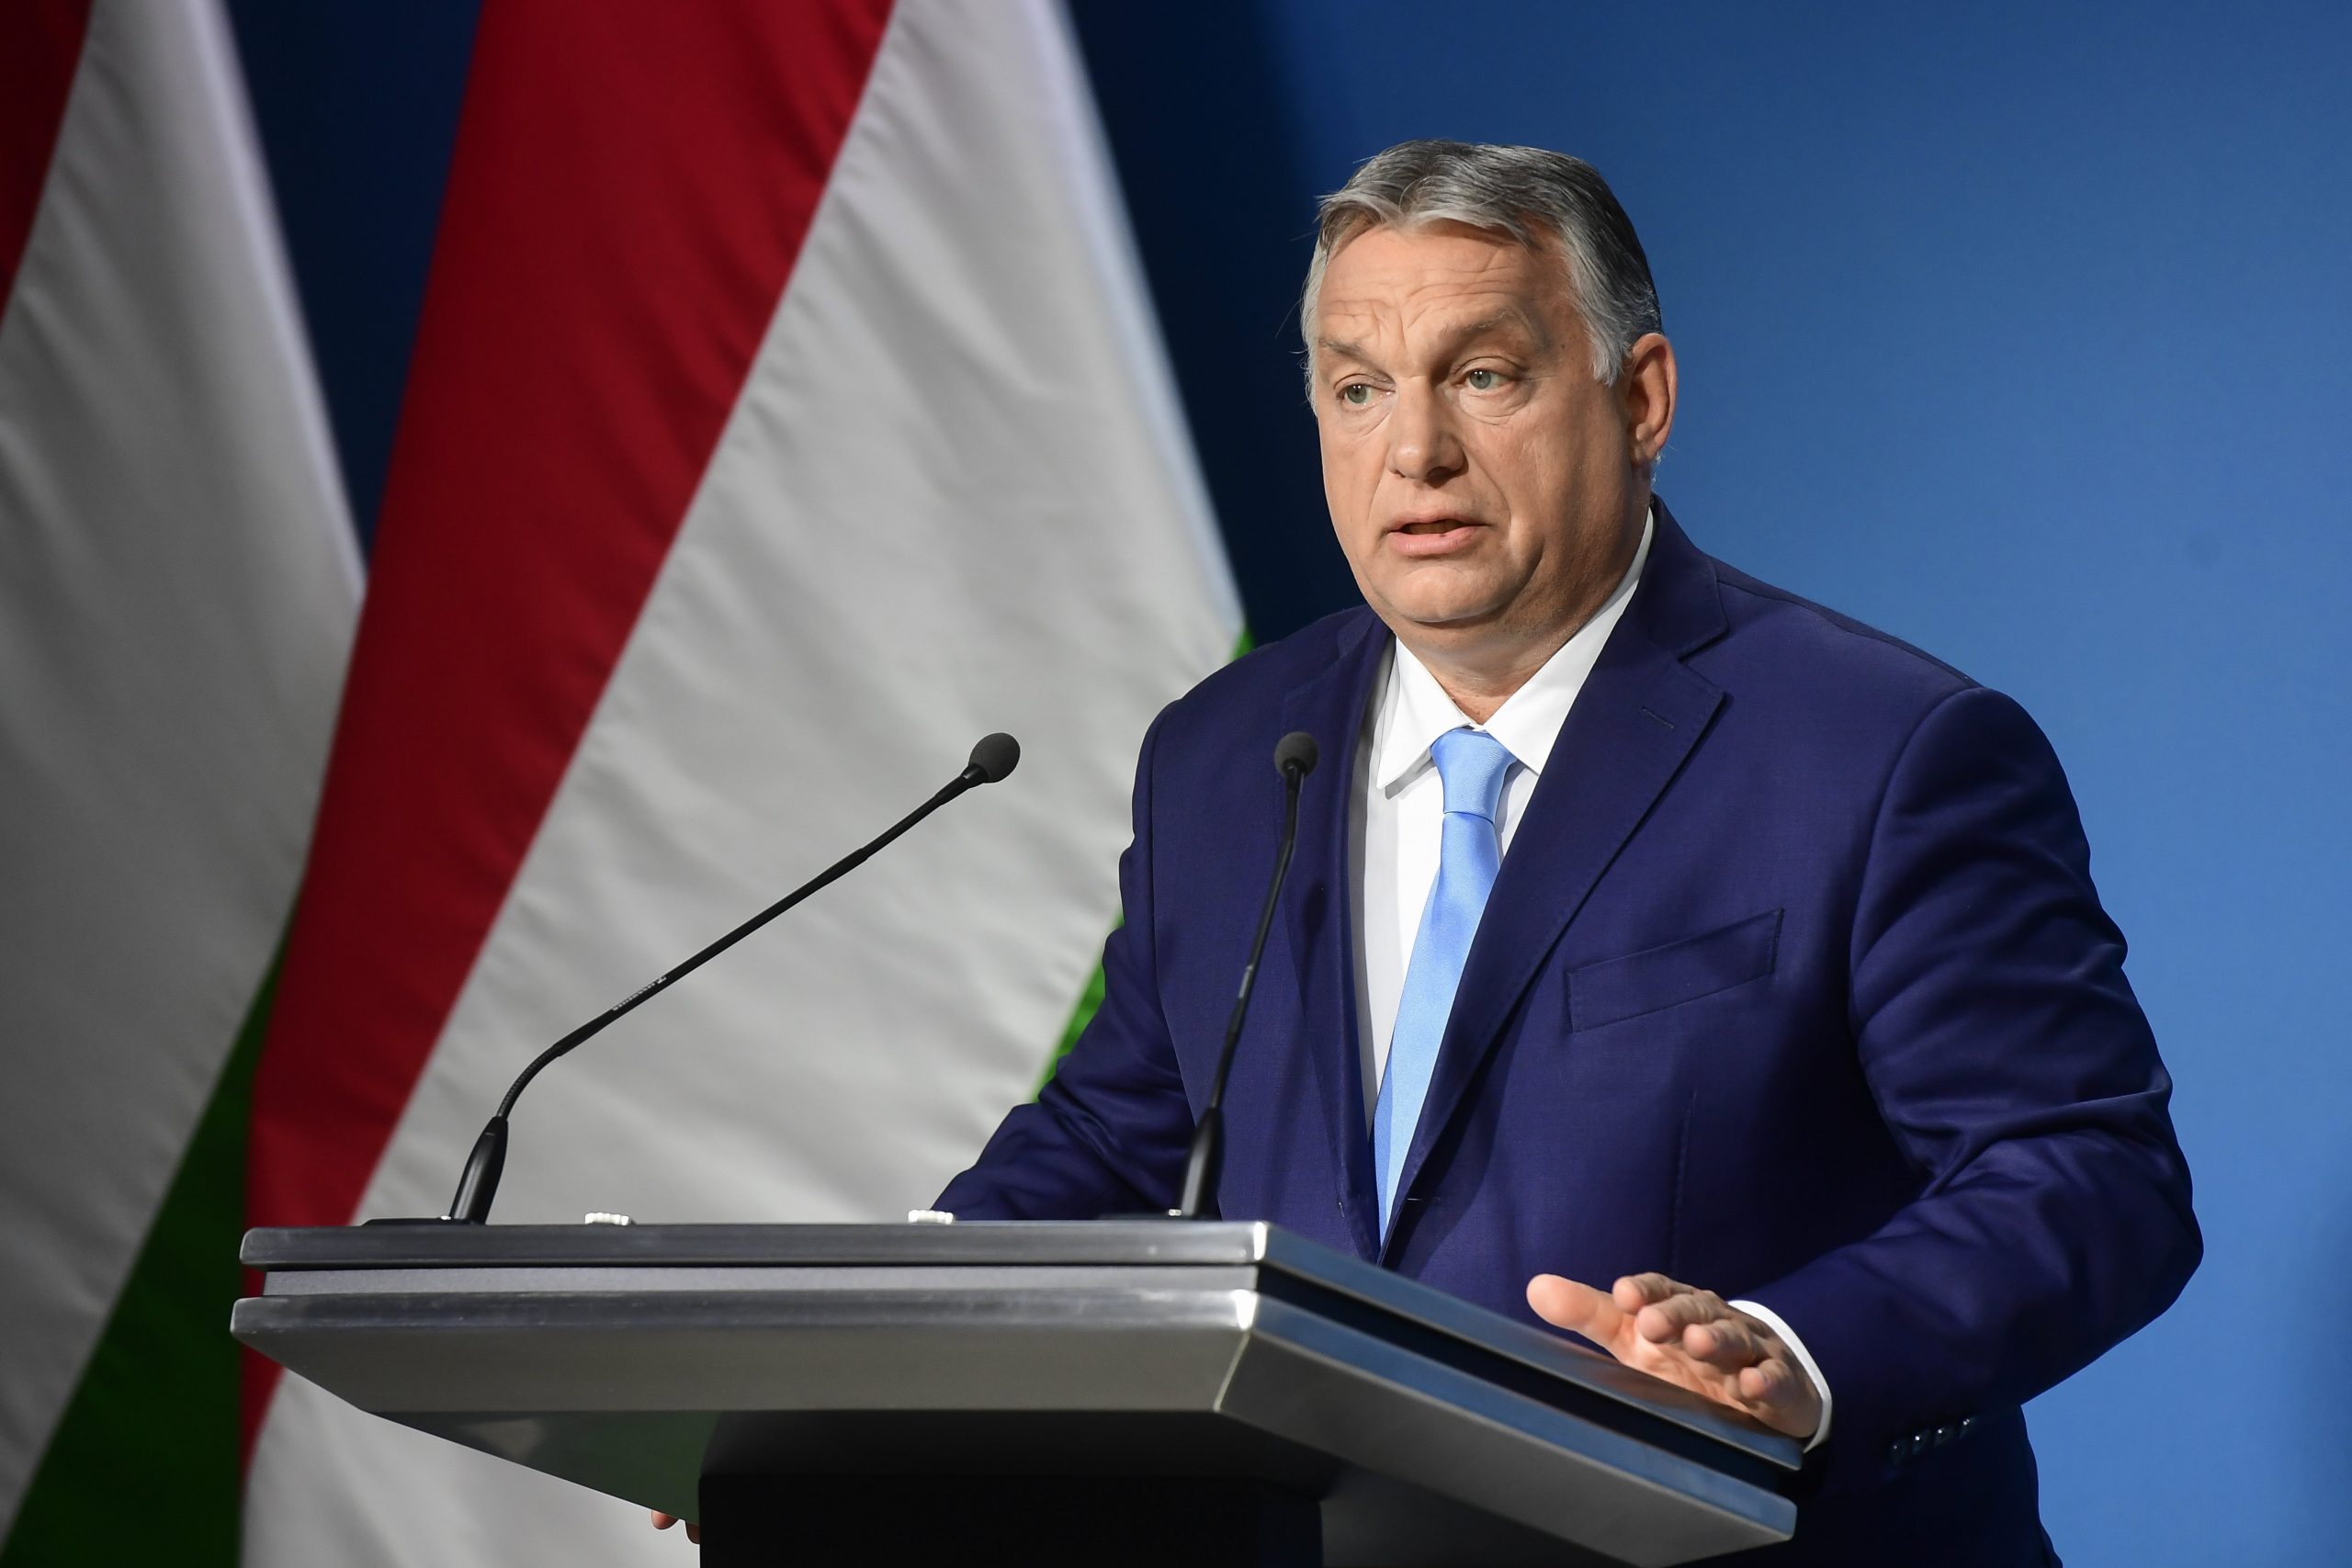 Orbán Gov't Accused of Using 'Pegasus' Spyware Against Political Opponents, Journalists